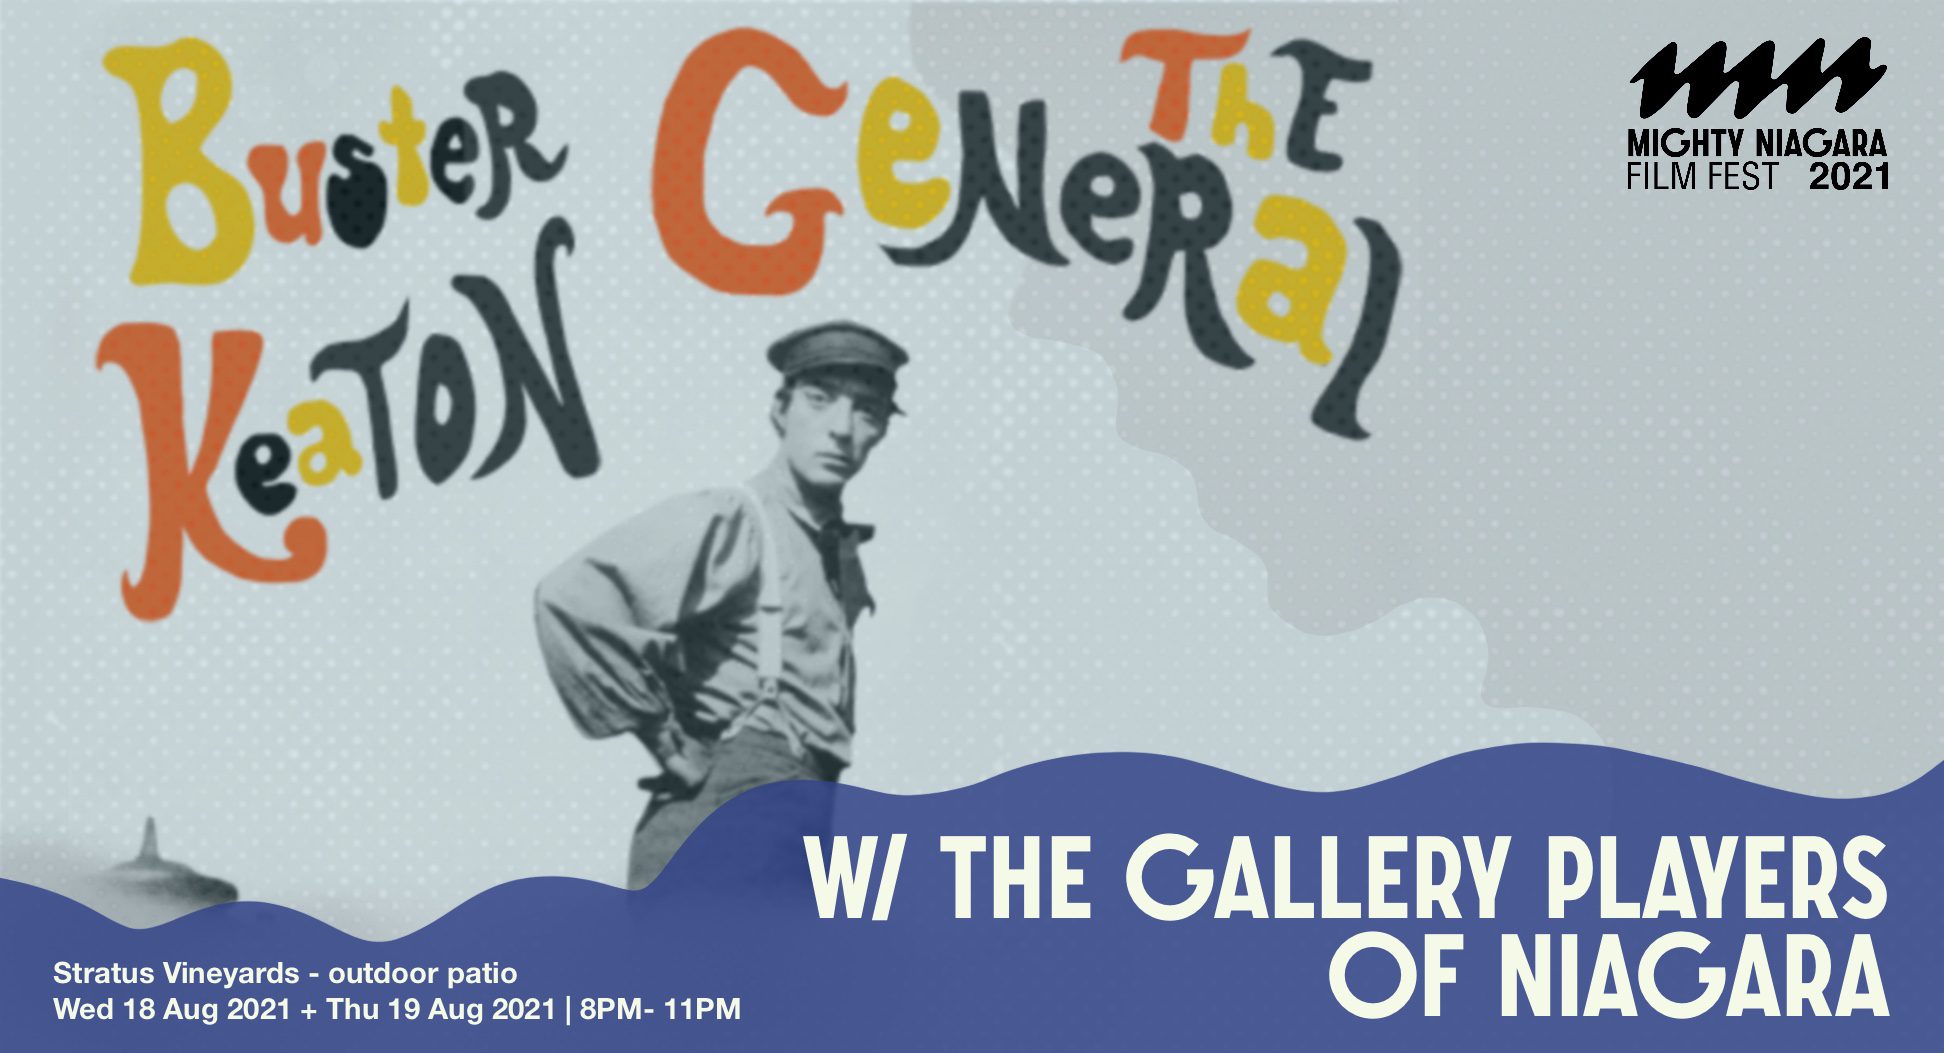 The General with Gallery Players